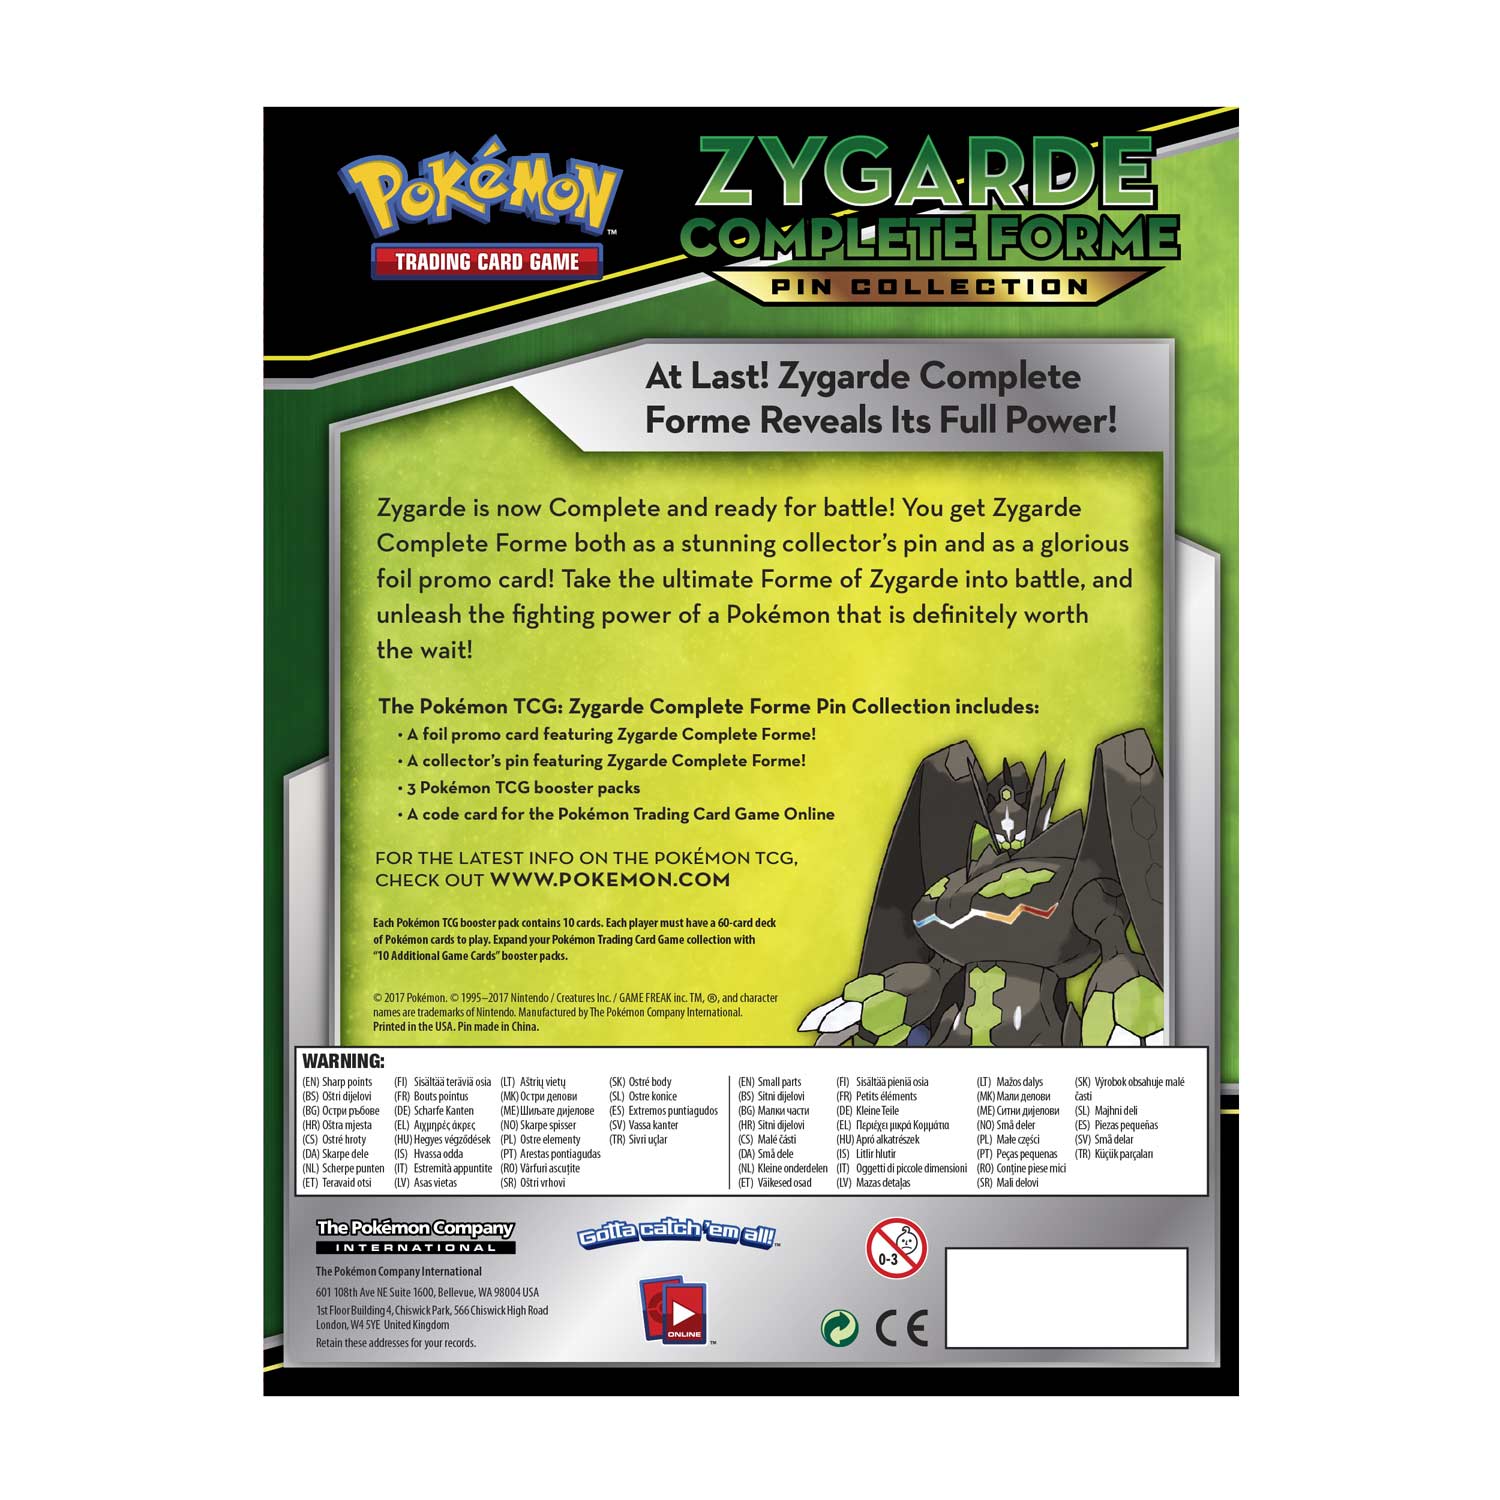 Pokemon Zygarde Complete Forme Pin Collection Pku80273 for sale online 